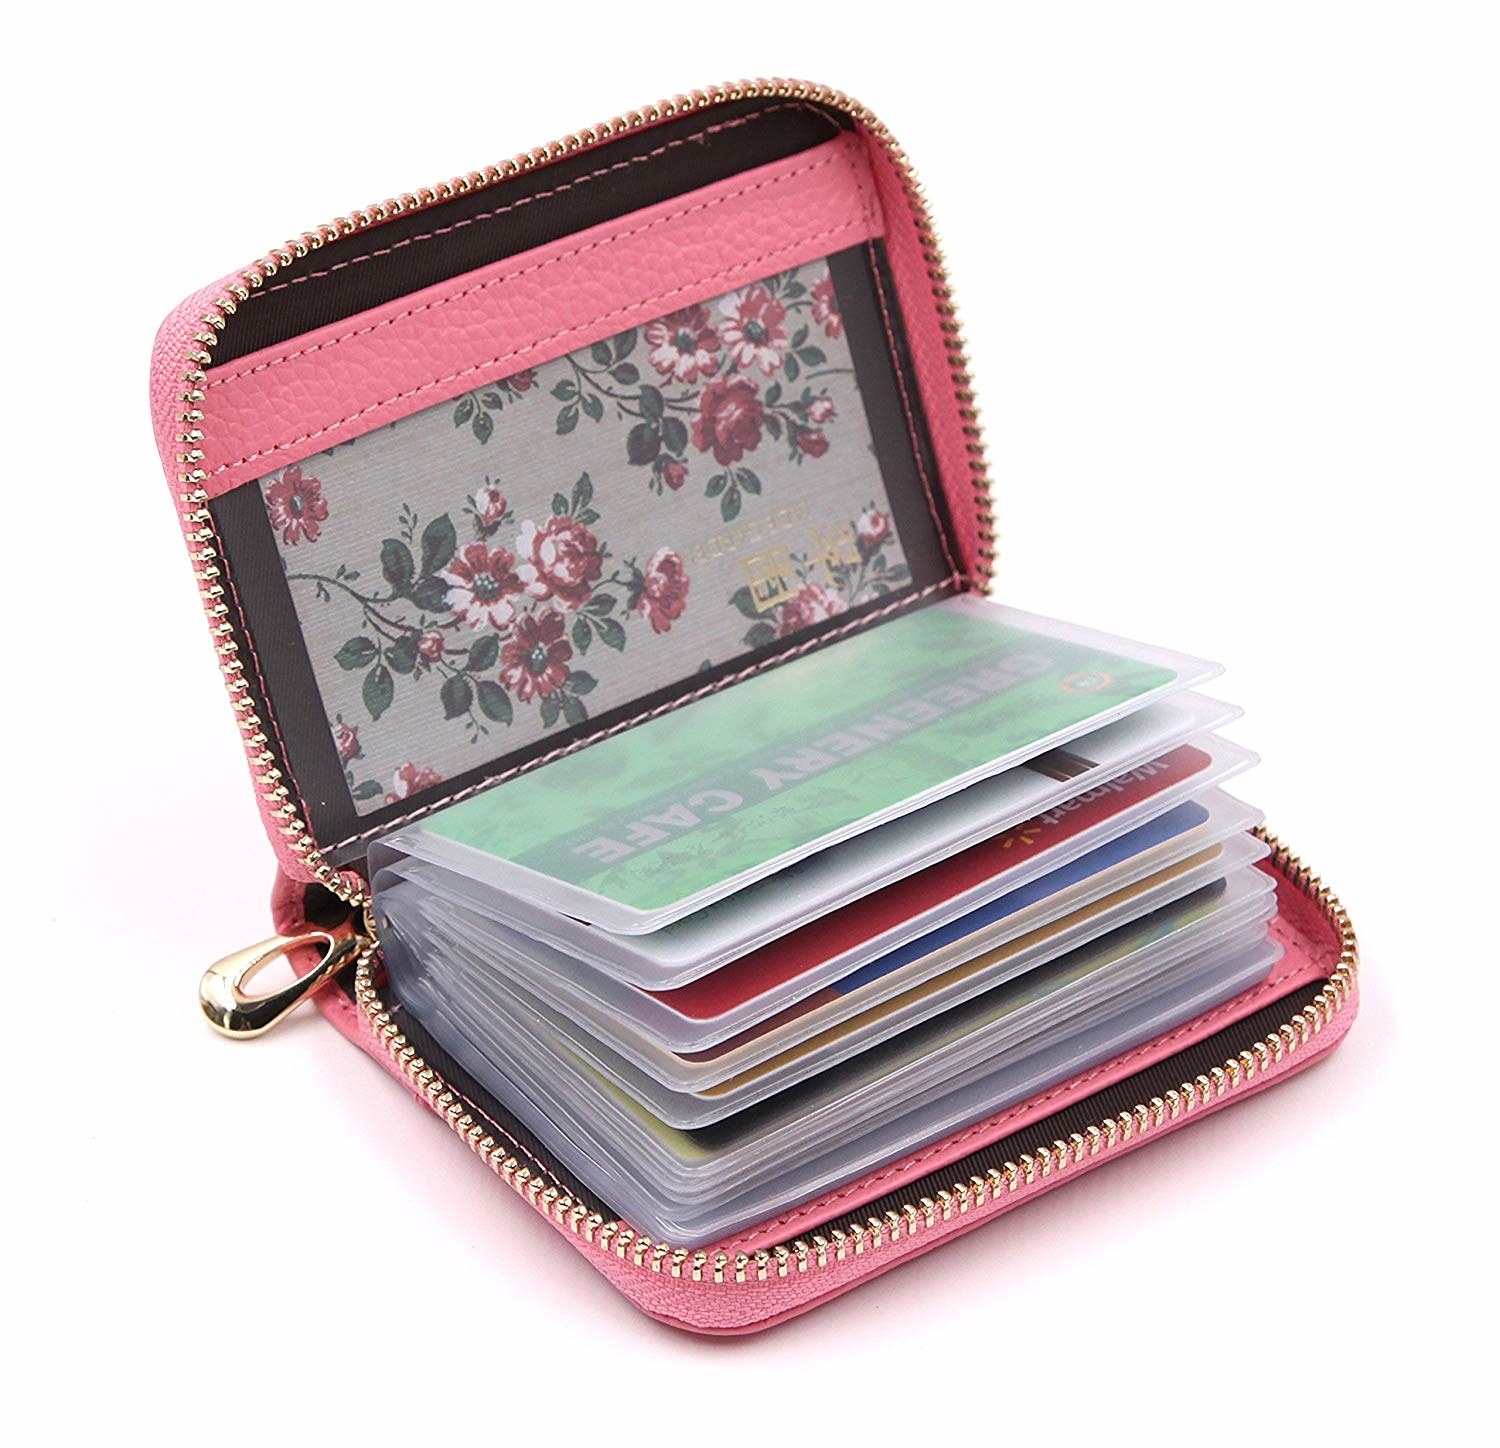 WEUIE Card Holders Clutches Cat Pattern Coin Purse PU Leather Pocket Wallets RFID Blocking Trifold Womens Wallet